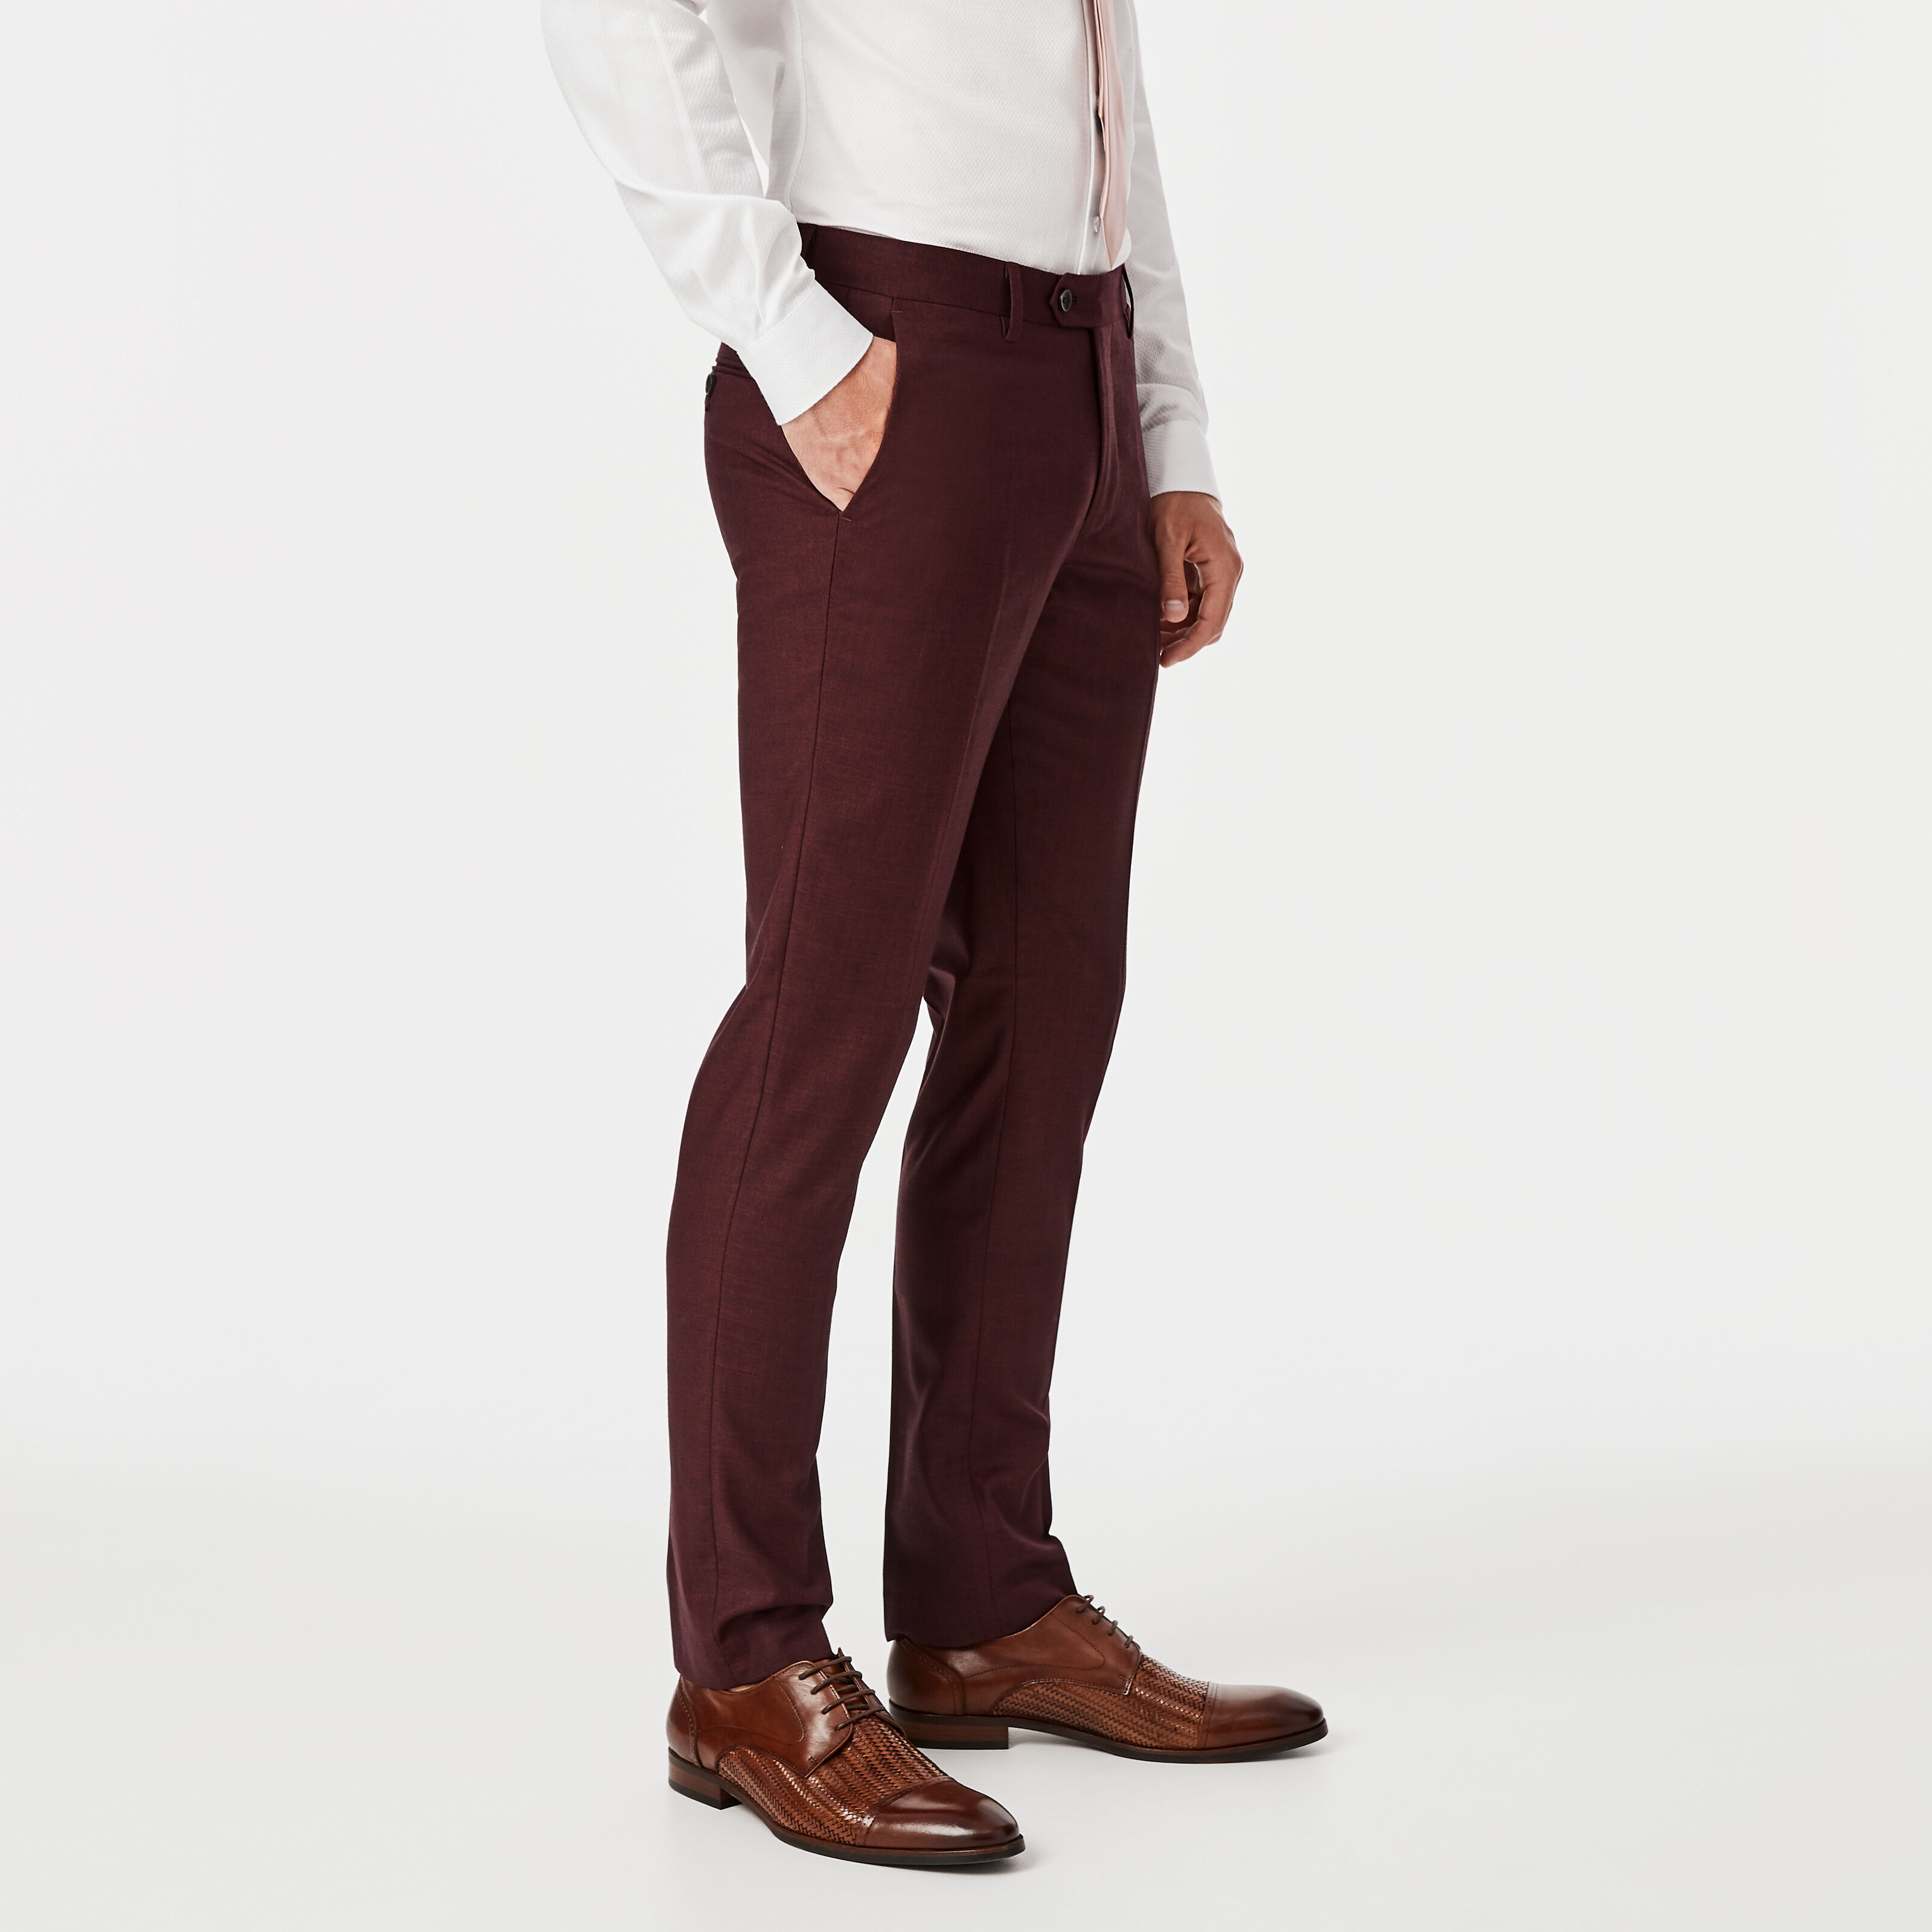 Maroon pant men outfit | Mens outfits, Maroon pants, Pants outfit men